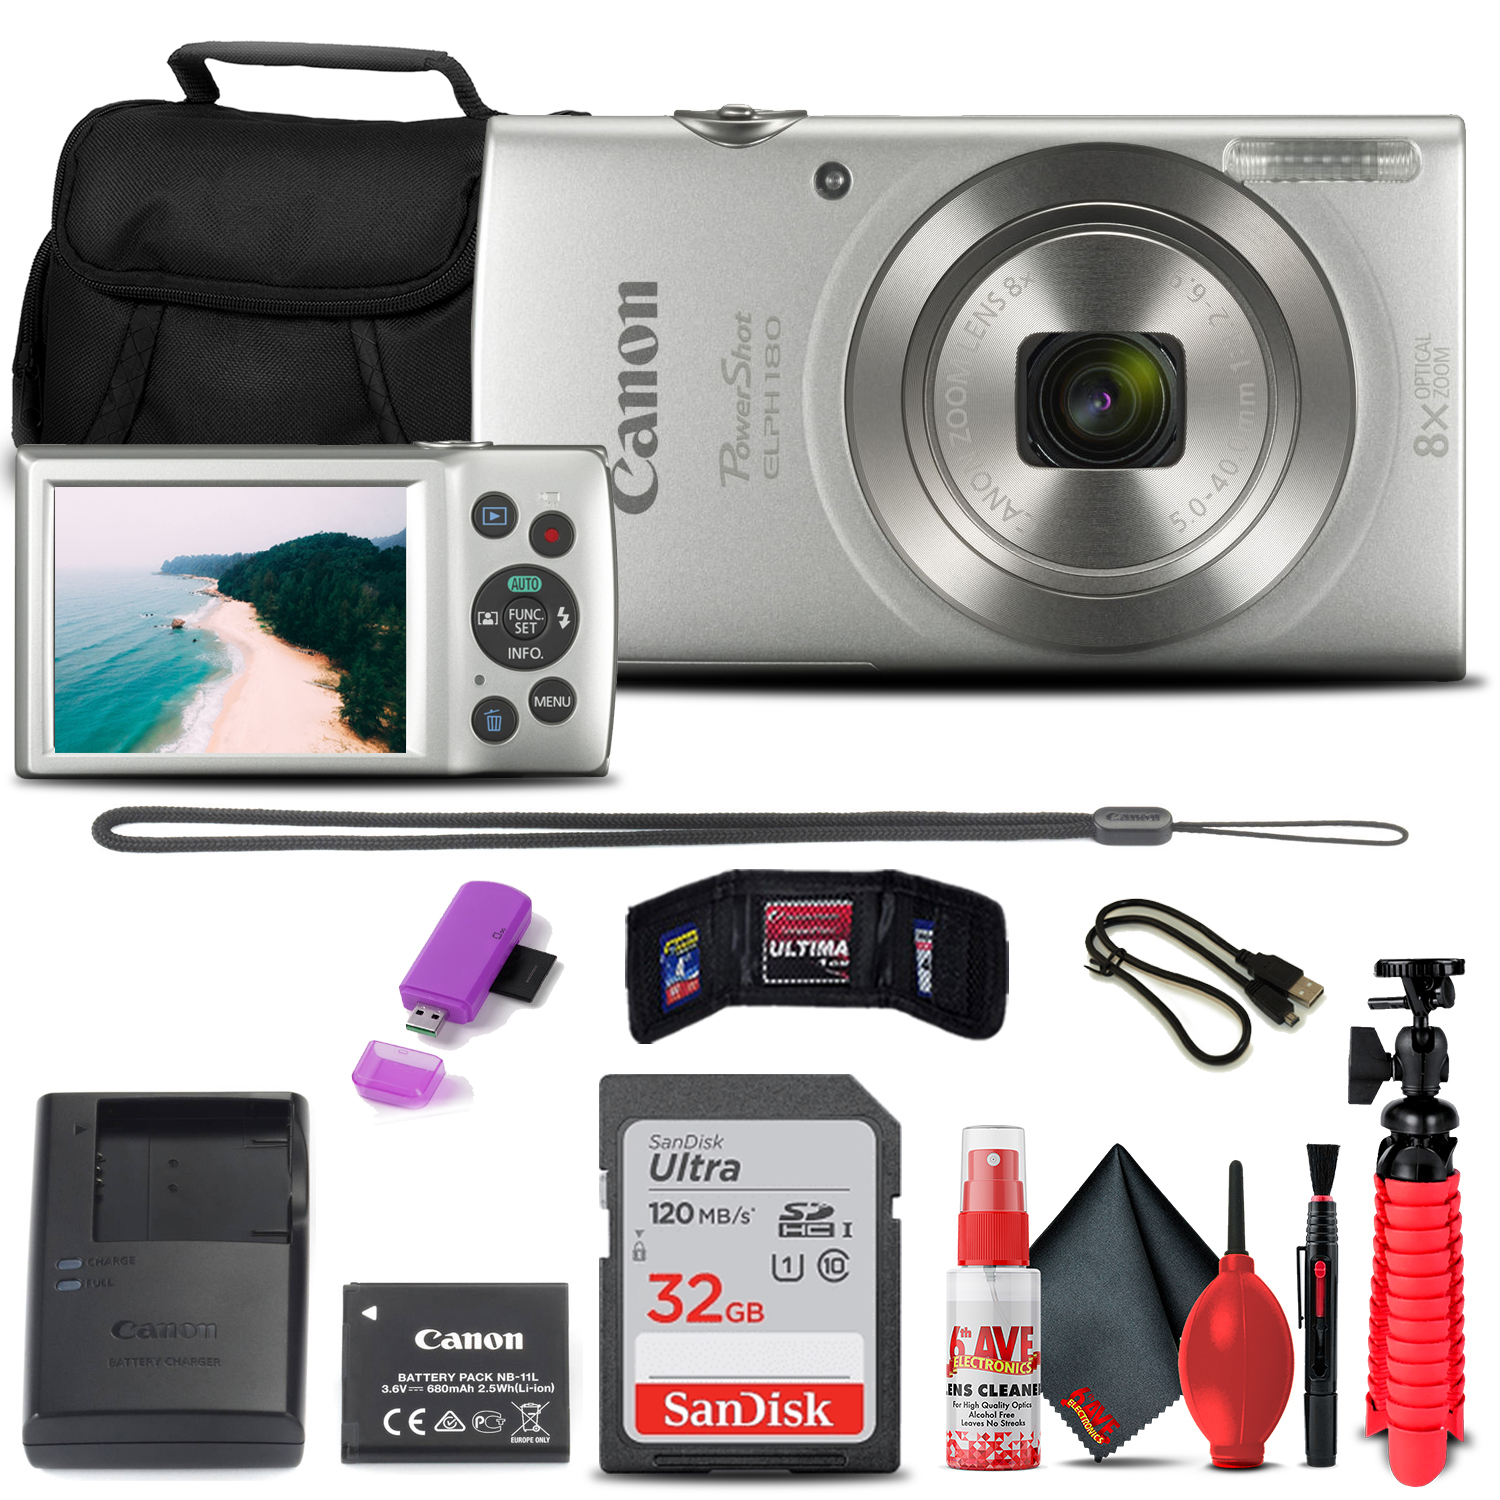 Canon PowerShot ELPH 180 Digital Camera (Silver) (1093C001) + 32GB Card + Case + Card Reader + Flex Tripod + Memory  Wallet + Cleaning Kit + USB Cable - image 1 of 6